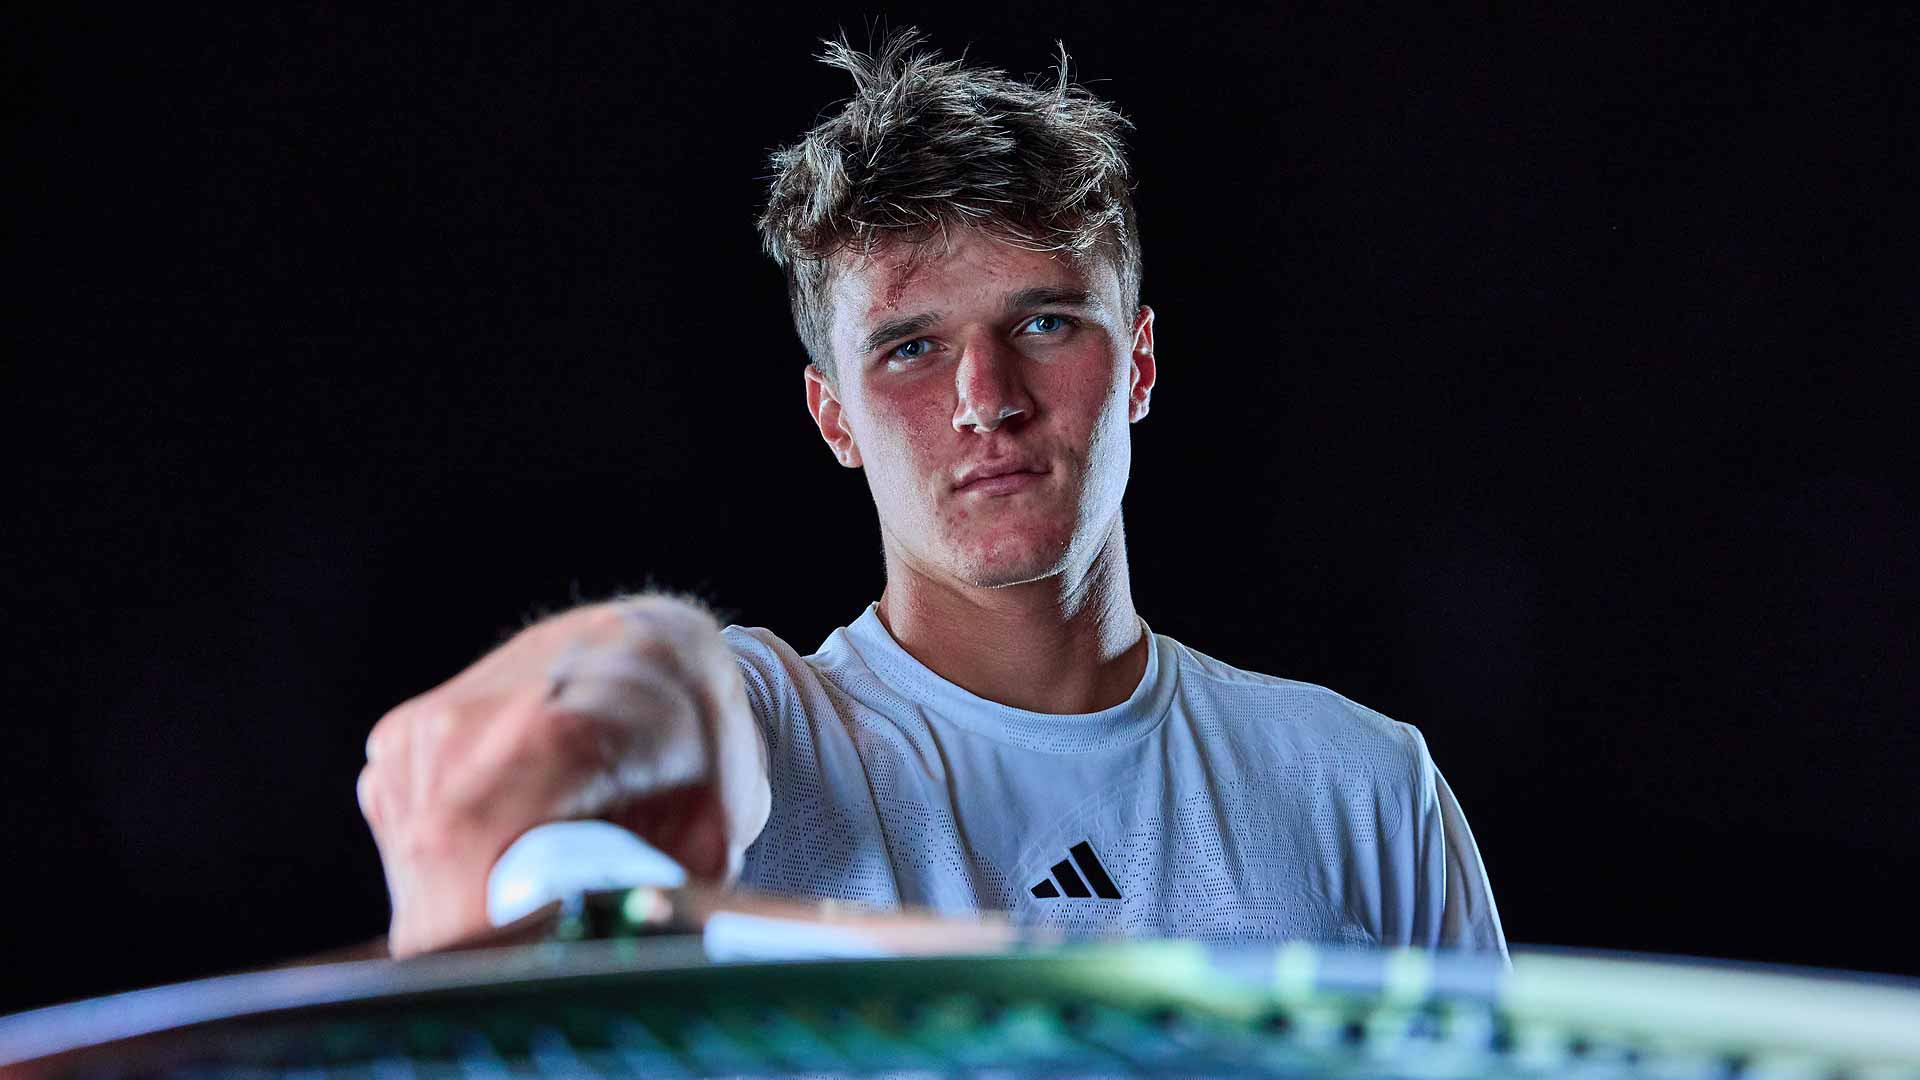 Jakub Mensik is the youngest man to reach the third round of the US Open since Fabrice Santoro in 1990.